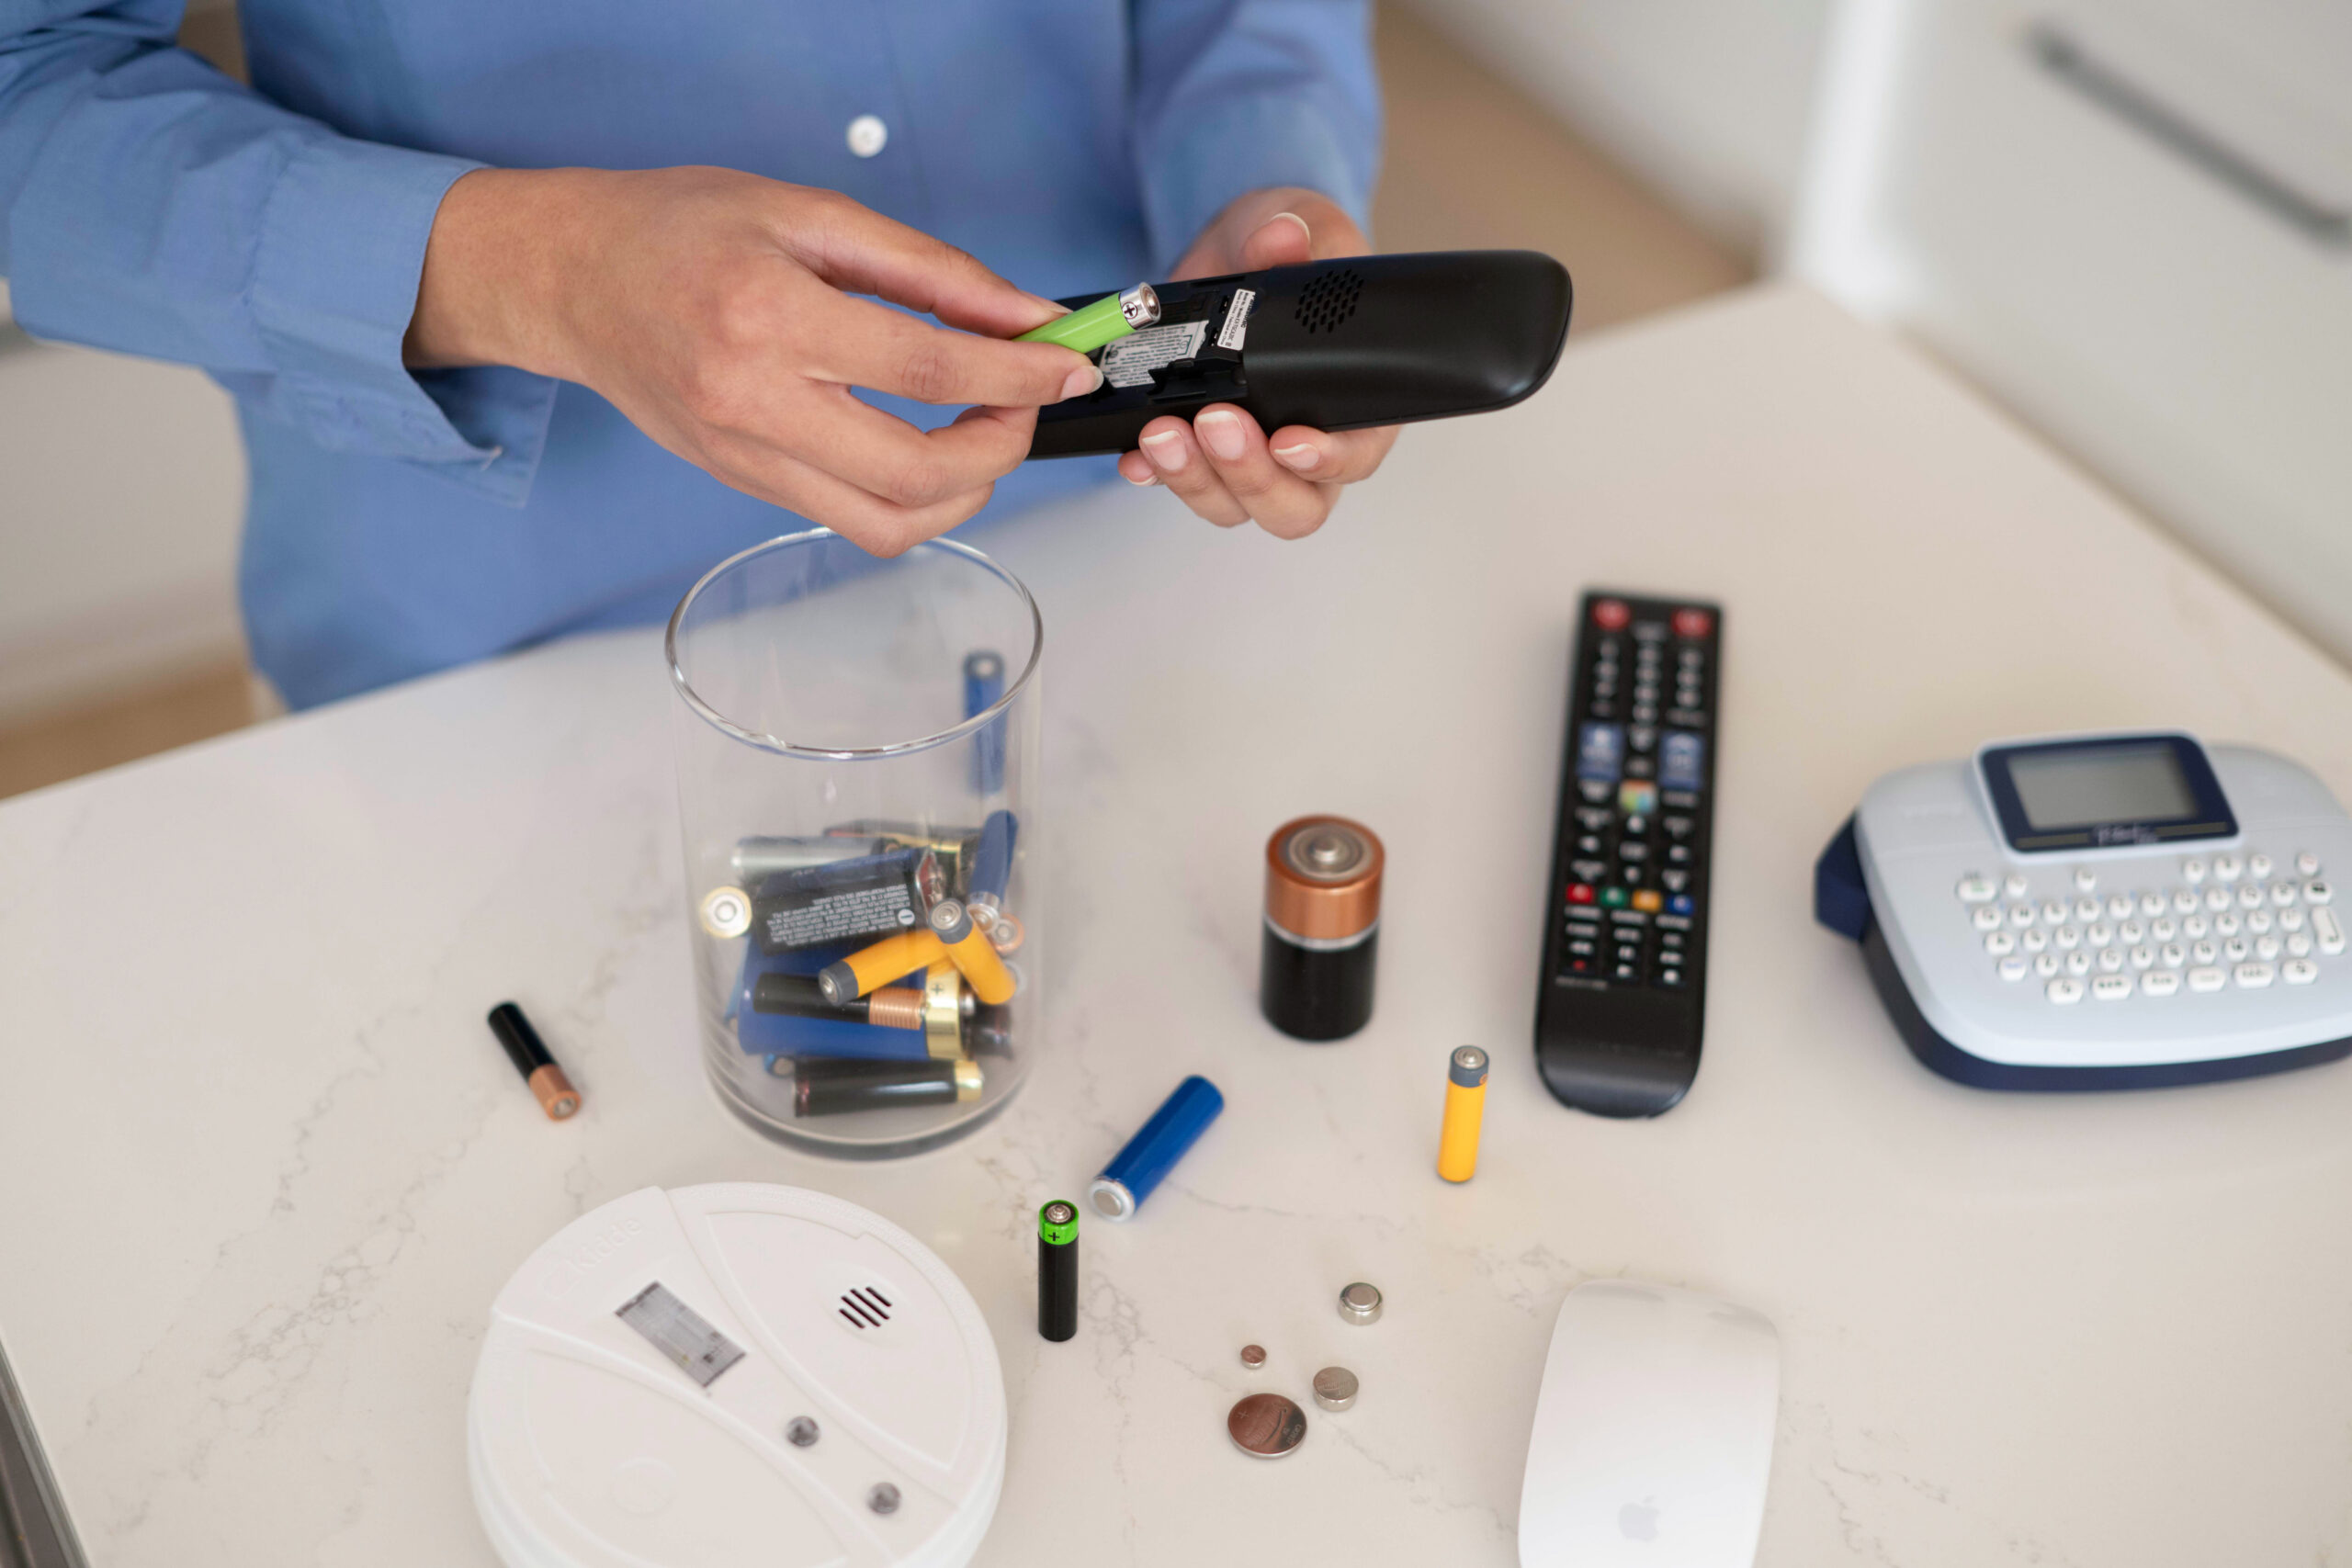 household items with single-use batteries